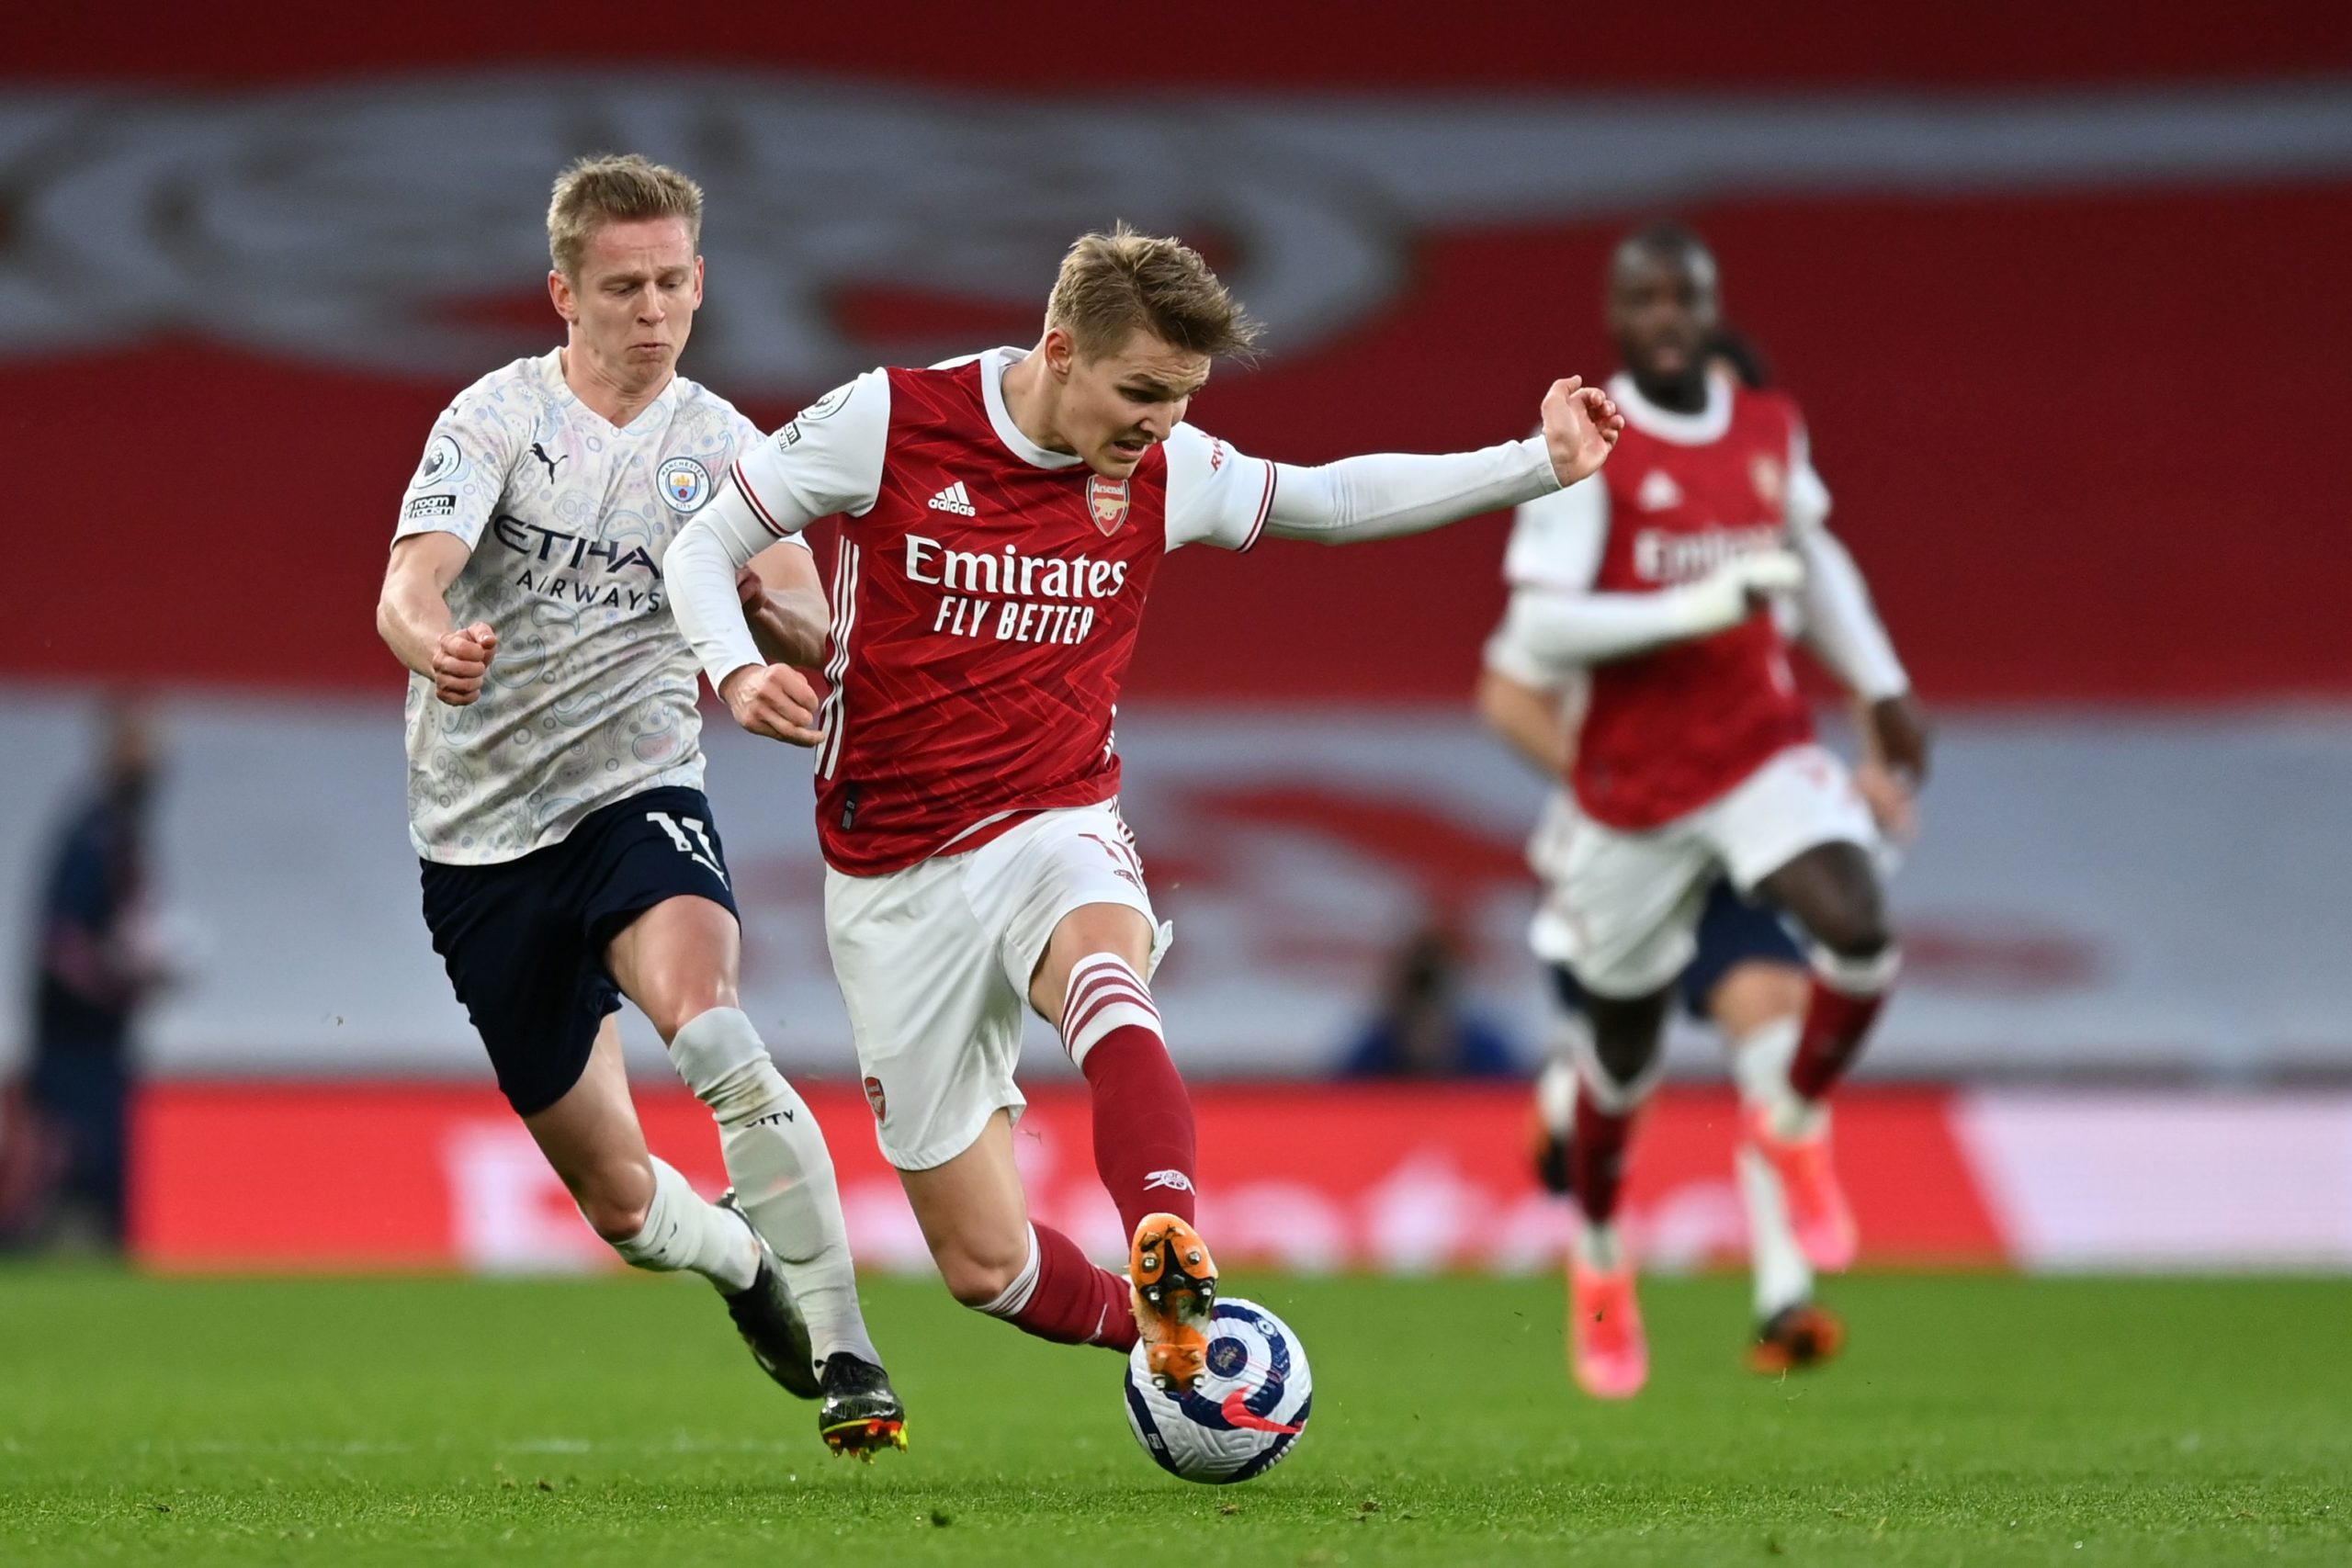 Arsenal Players Rated In Loss Vs Manchester City (Martin Odegaard can be seen in the picture)